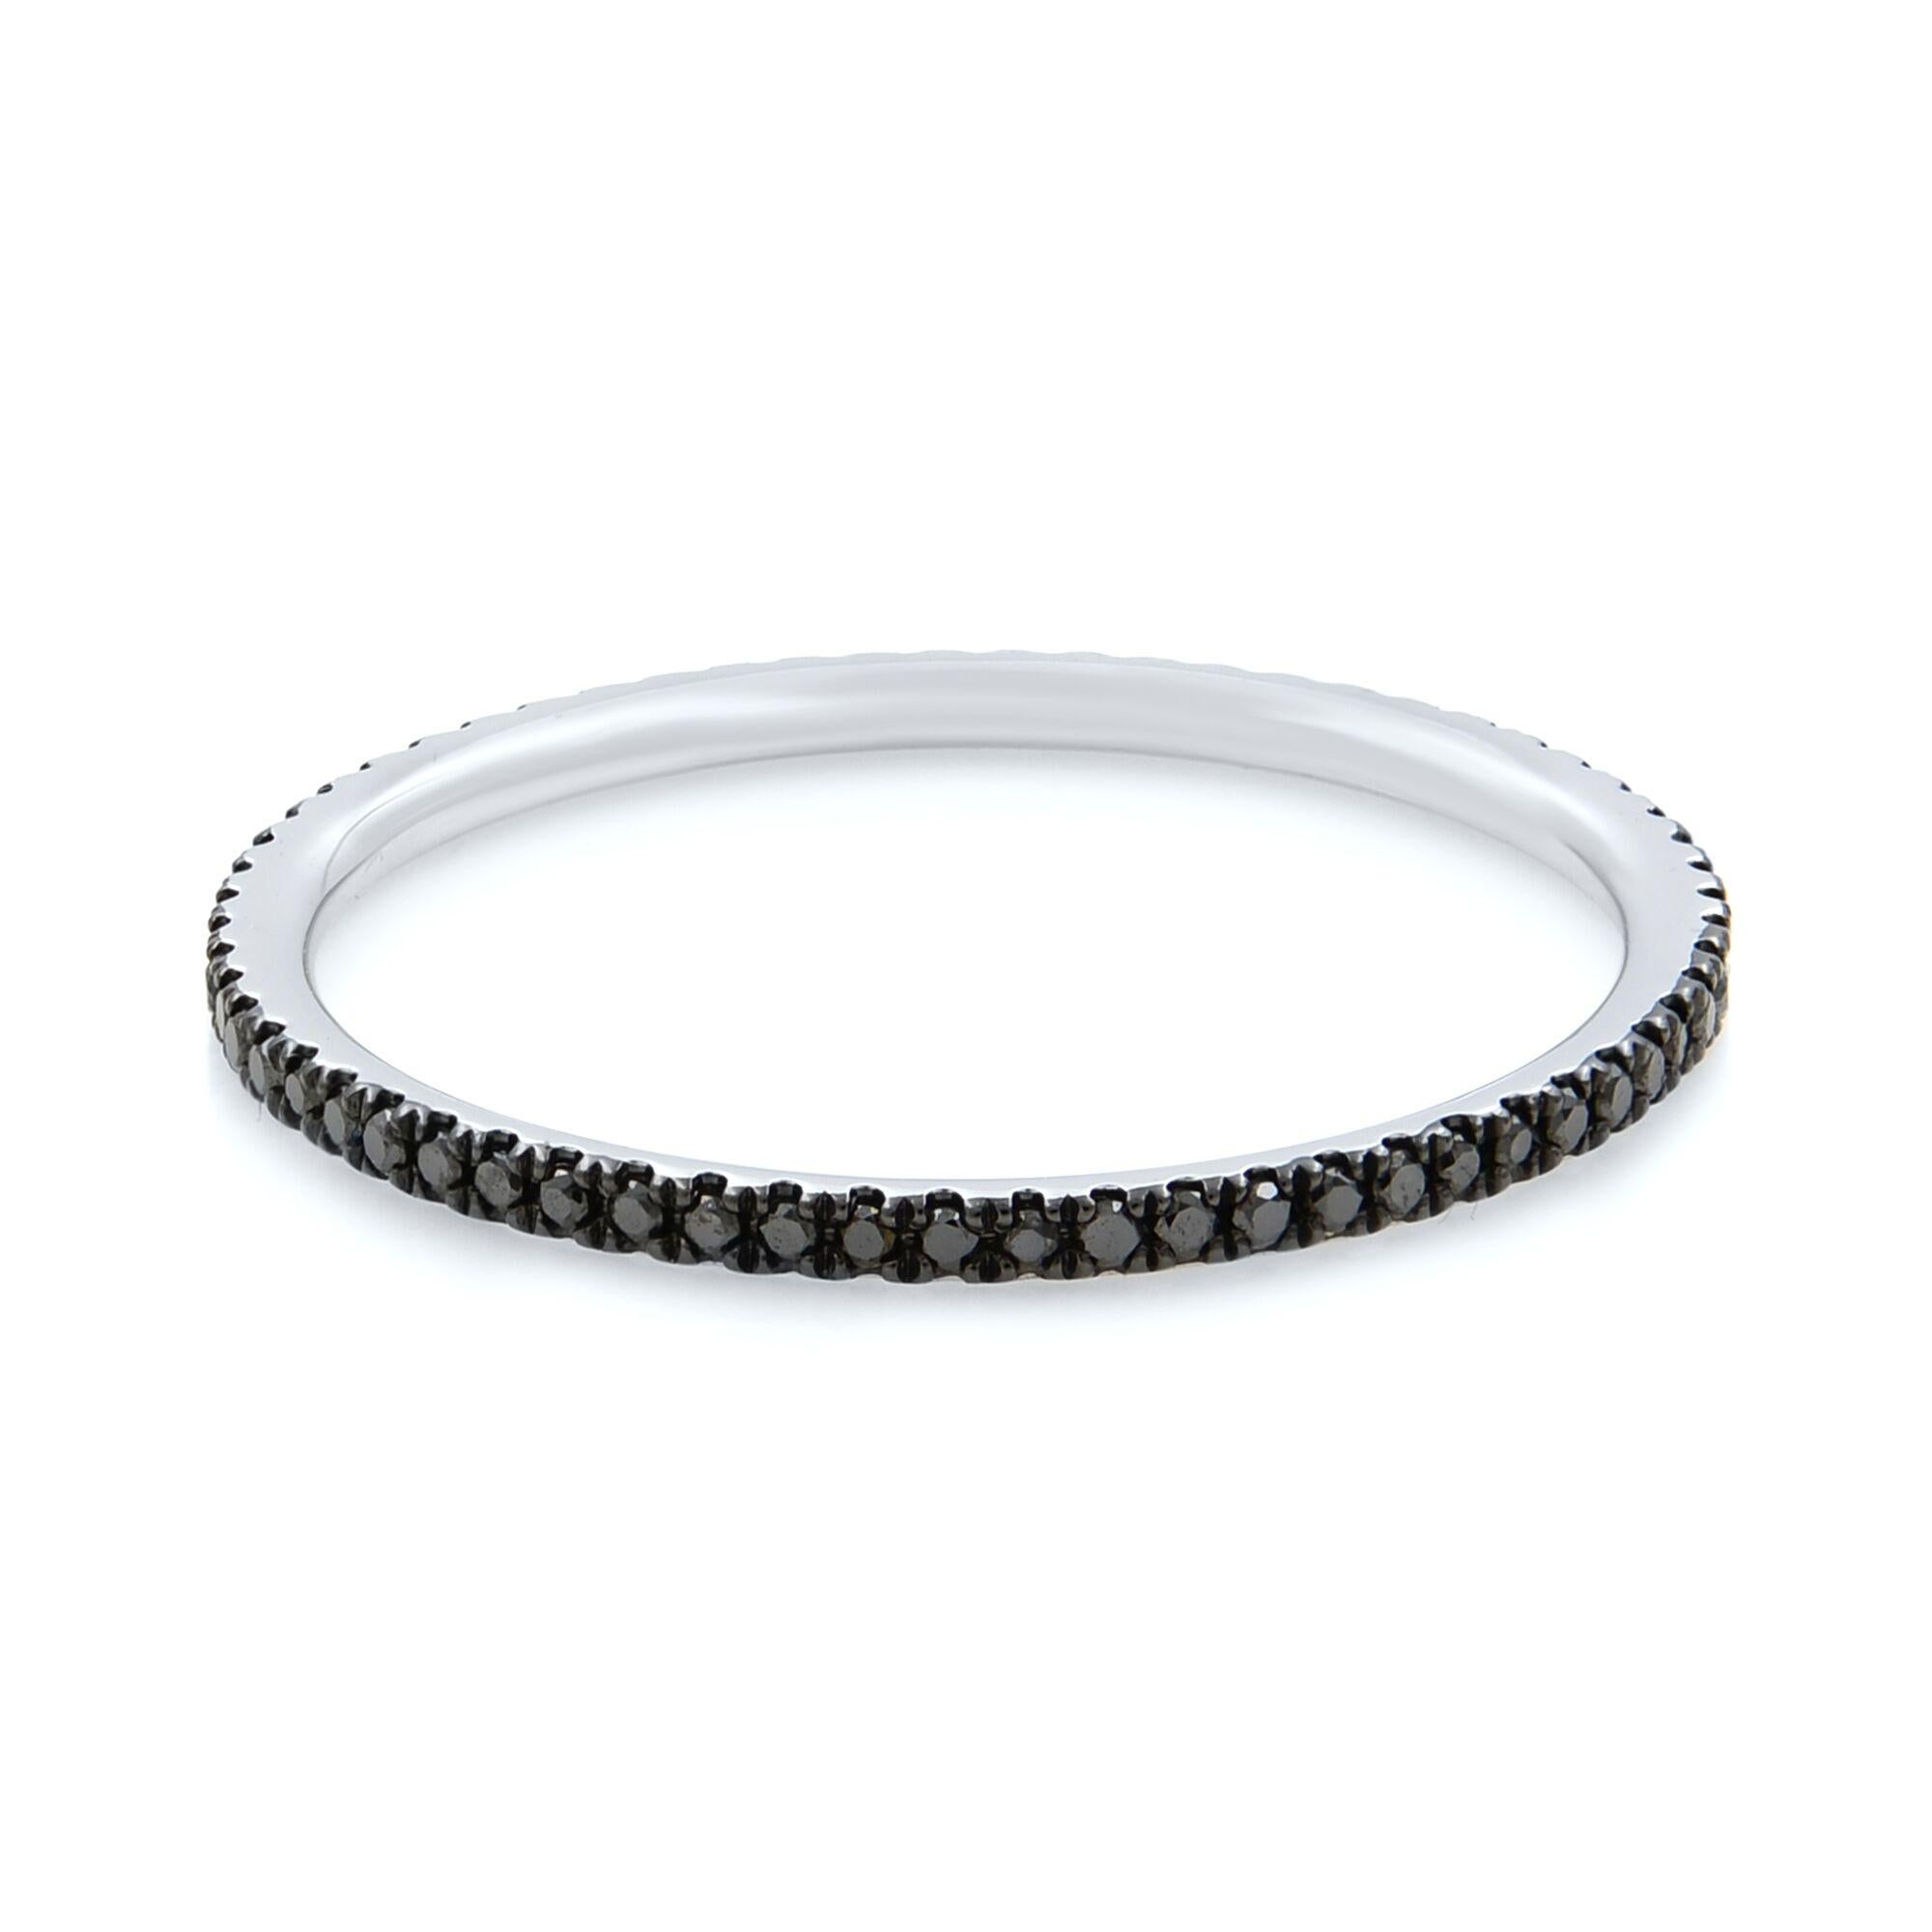 This beautiful black diamond eternity band is our original design ring. It is featuring a full circle of gleaming micro pave black diamonds set around the entire ring. This ultra-thin diamond band is the perfect complement to any collection or to